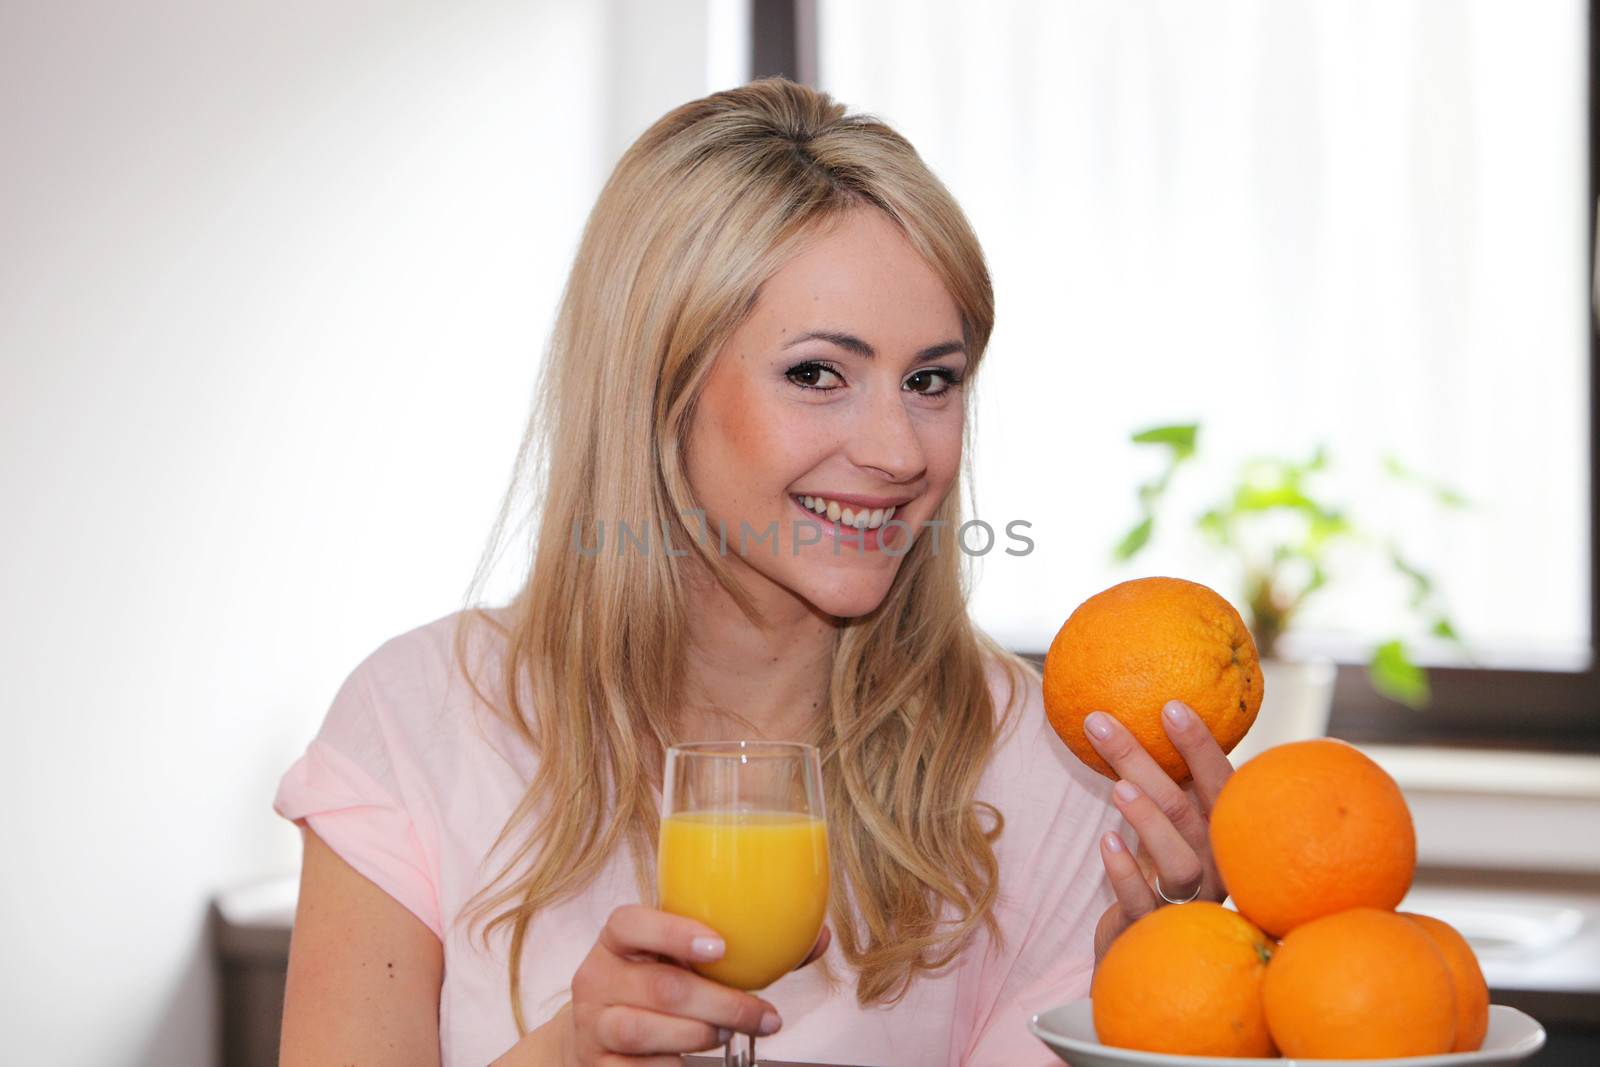 Happy young woman with fresh oranges and a glass of orange juice in her hand smiling at the camera conceptual of a healthy diet and lifestyle